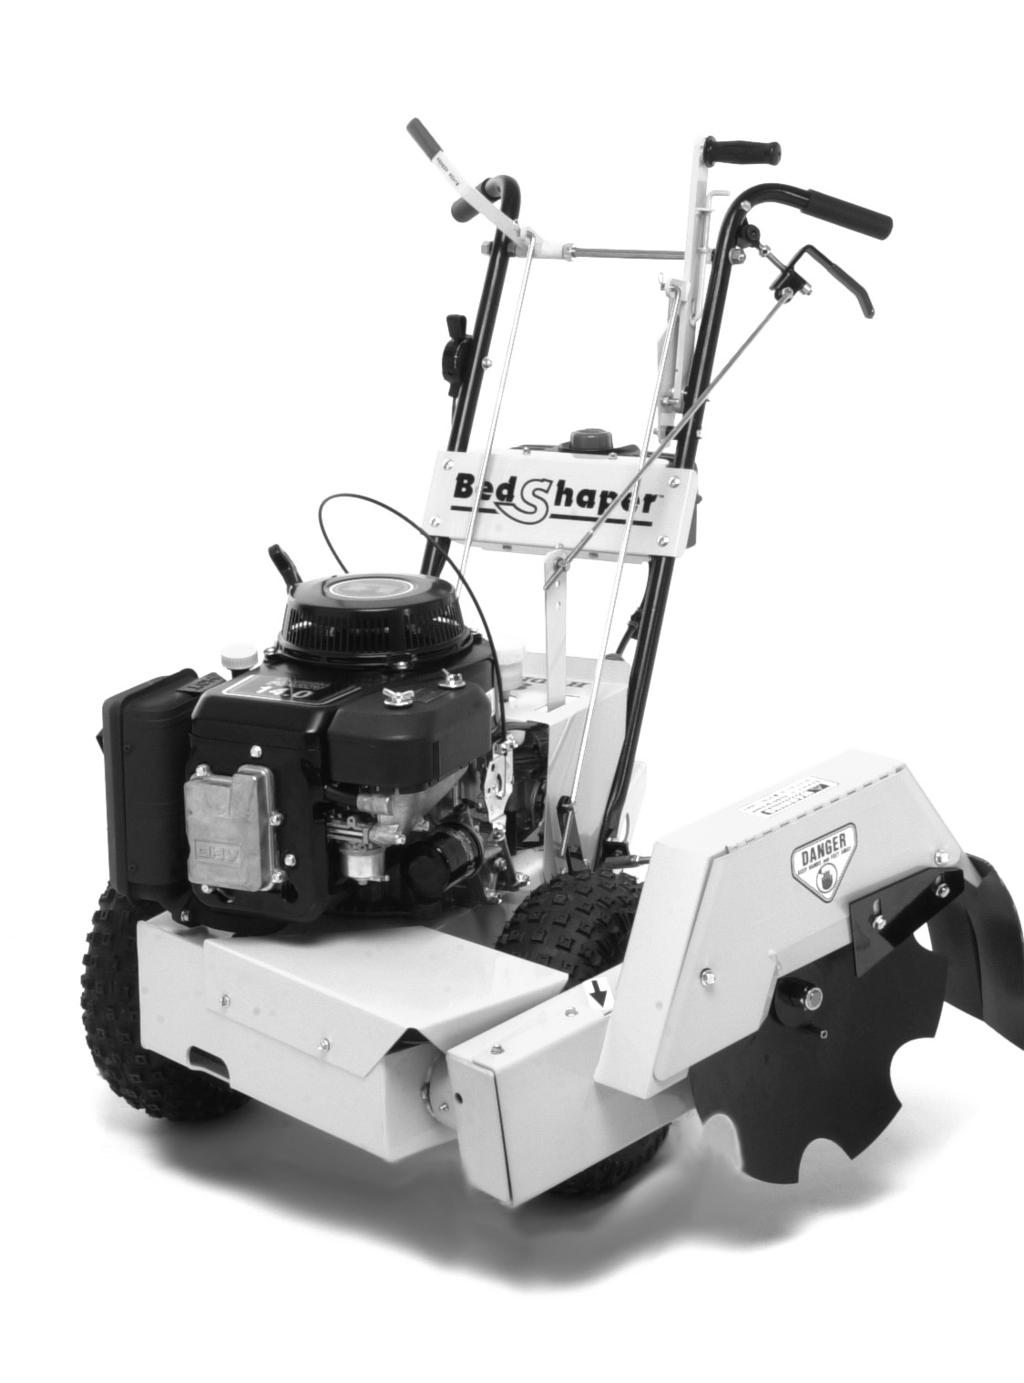 Little Wonder Model 900 Walk Behind Edger OPERATOR S MANUAL Manual Includes: Safety Information Operating Instructions Maintenance Schedule Tips For Better